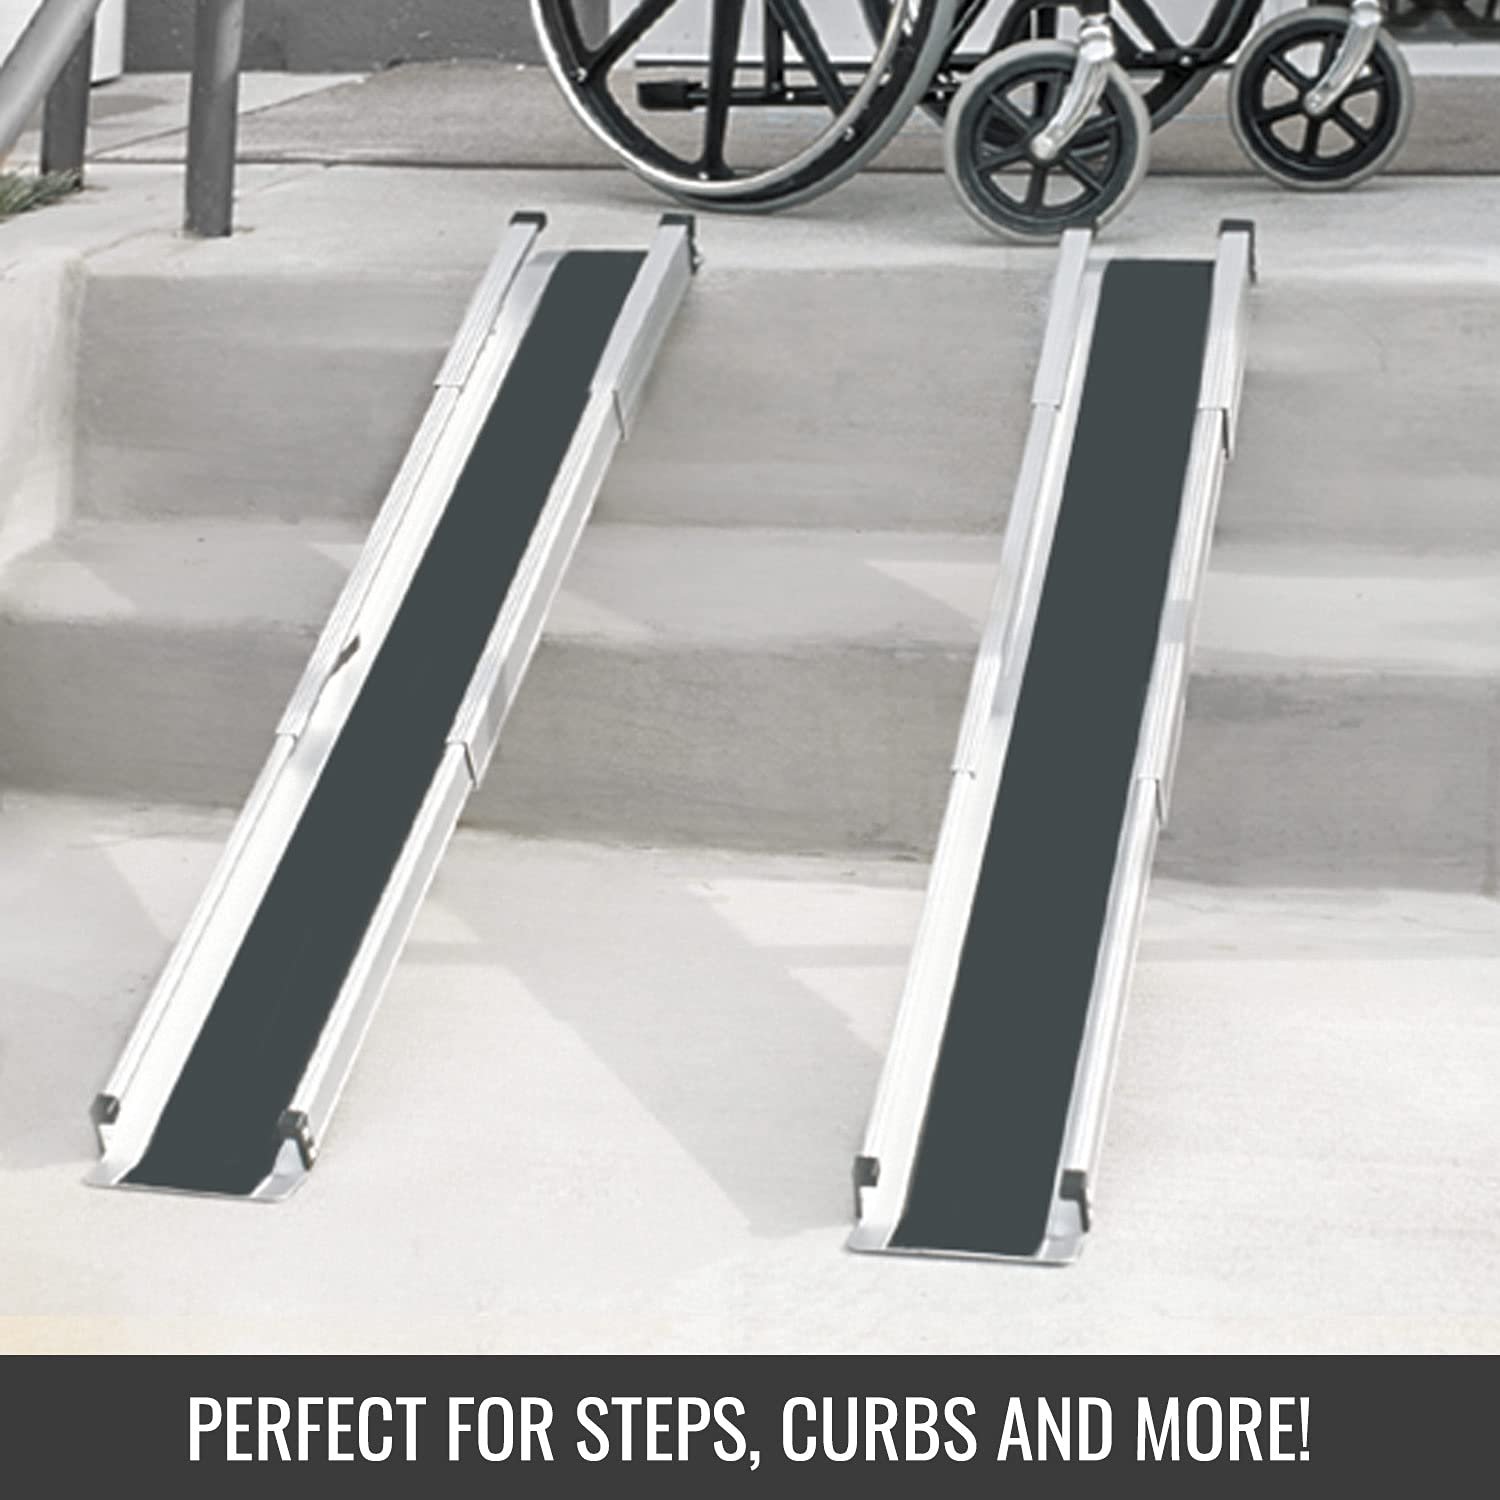 DMI Wheelchair Ramp,Entry Ramp,Threshold Ramp and Handicap Ramp, FSA Eligible, is Portable and Adjustable from 3-5 Ft Long, 4.5 In Wide for Entryway, Doors,Steps,Shed or Curb, 2 Ramps Included